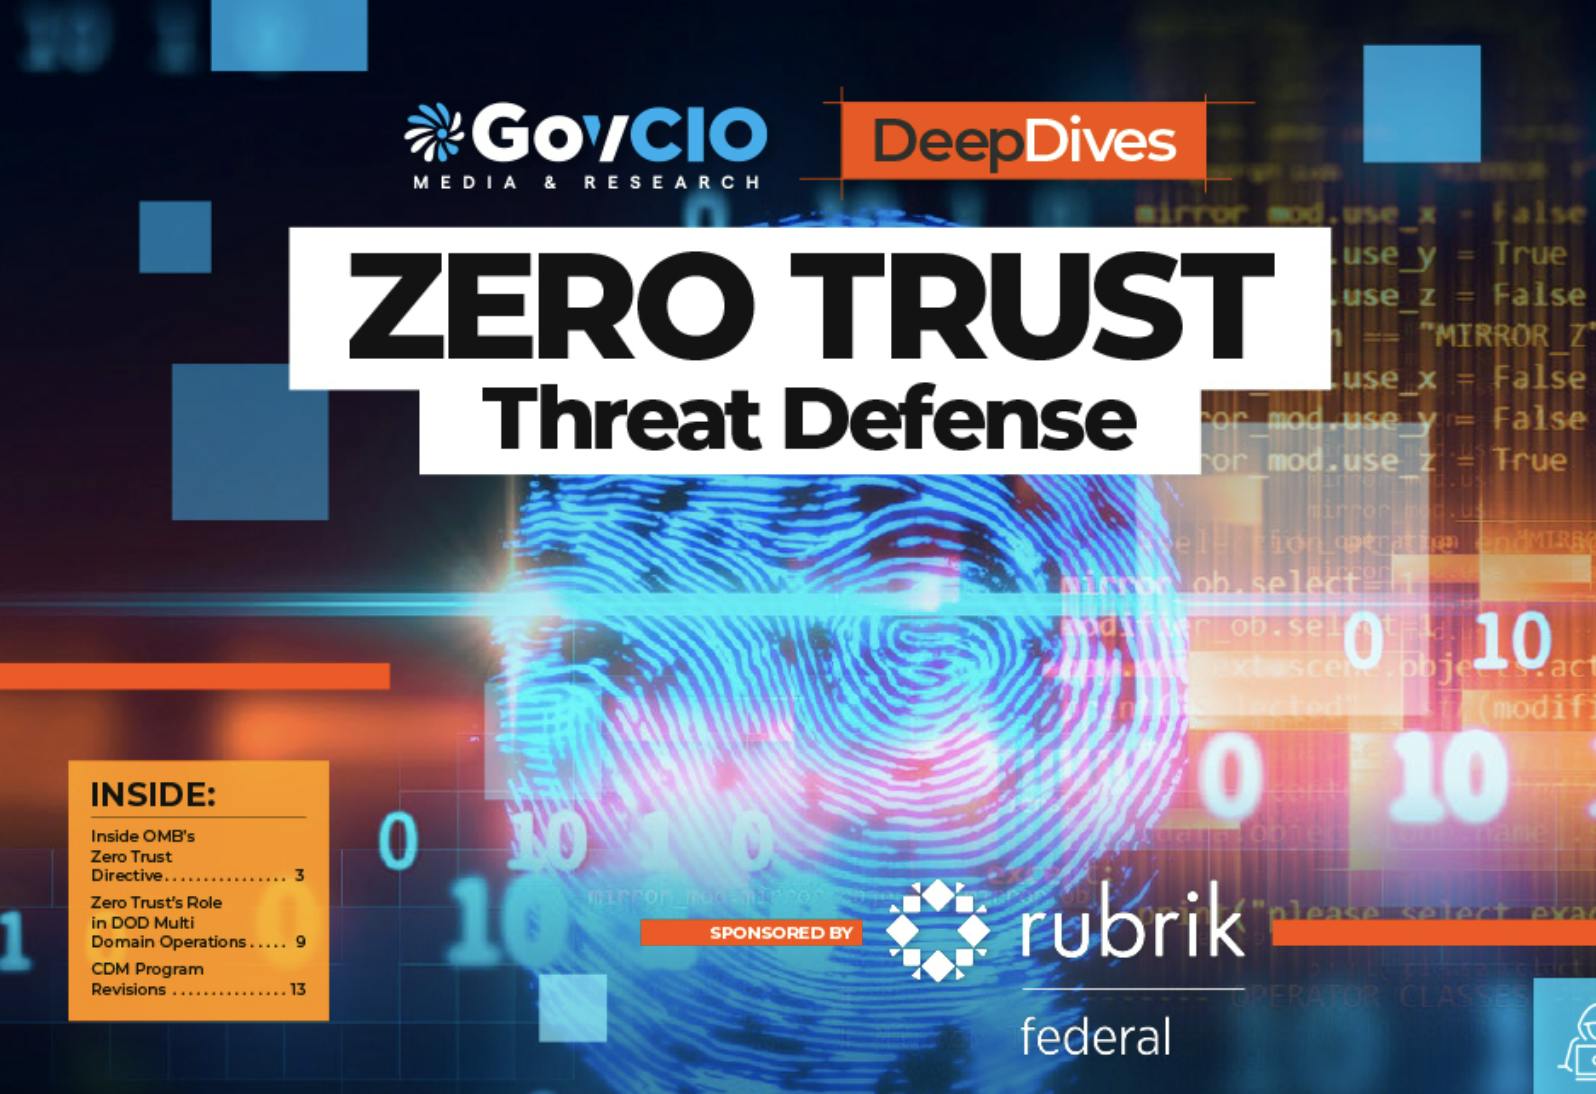 Deep Dive ebook cover with a fingerprint in the background and the words Zero Trust Threat Defense at the top. Sponsored by Rubrik and produced by GovCIO Media and Research.